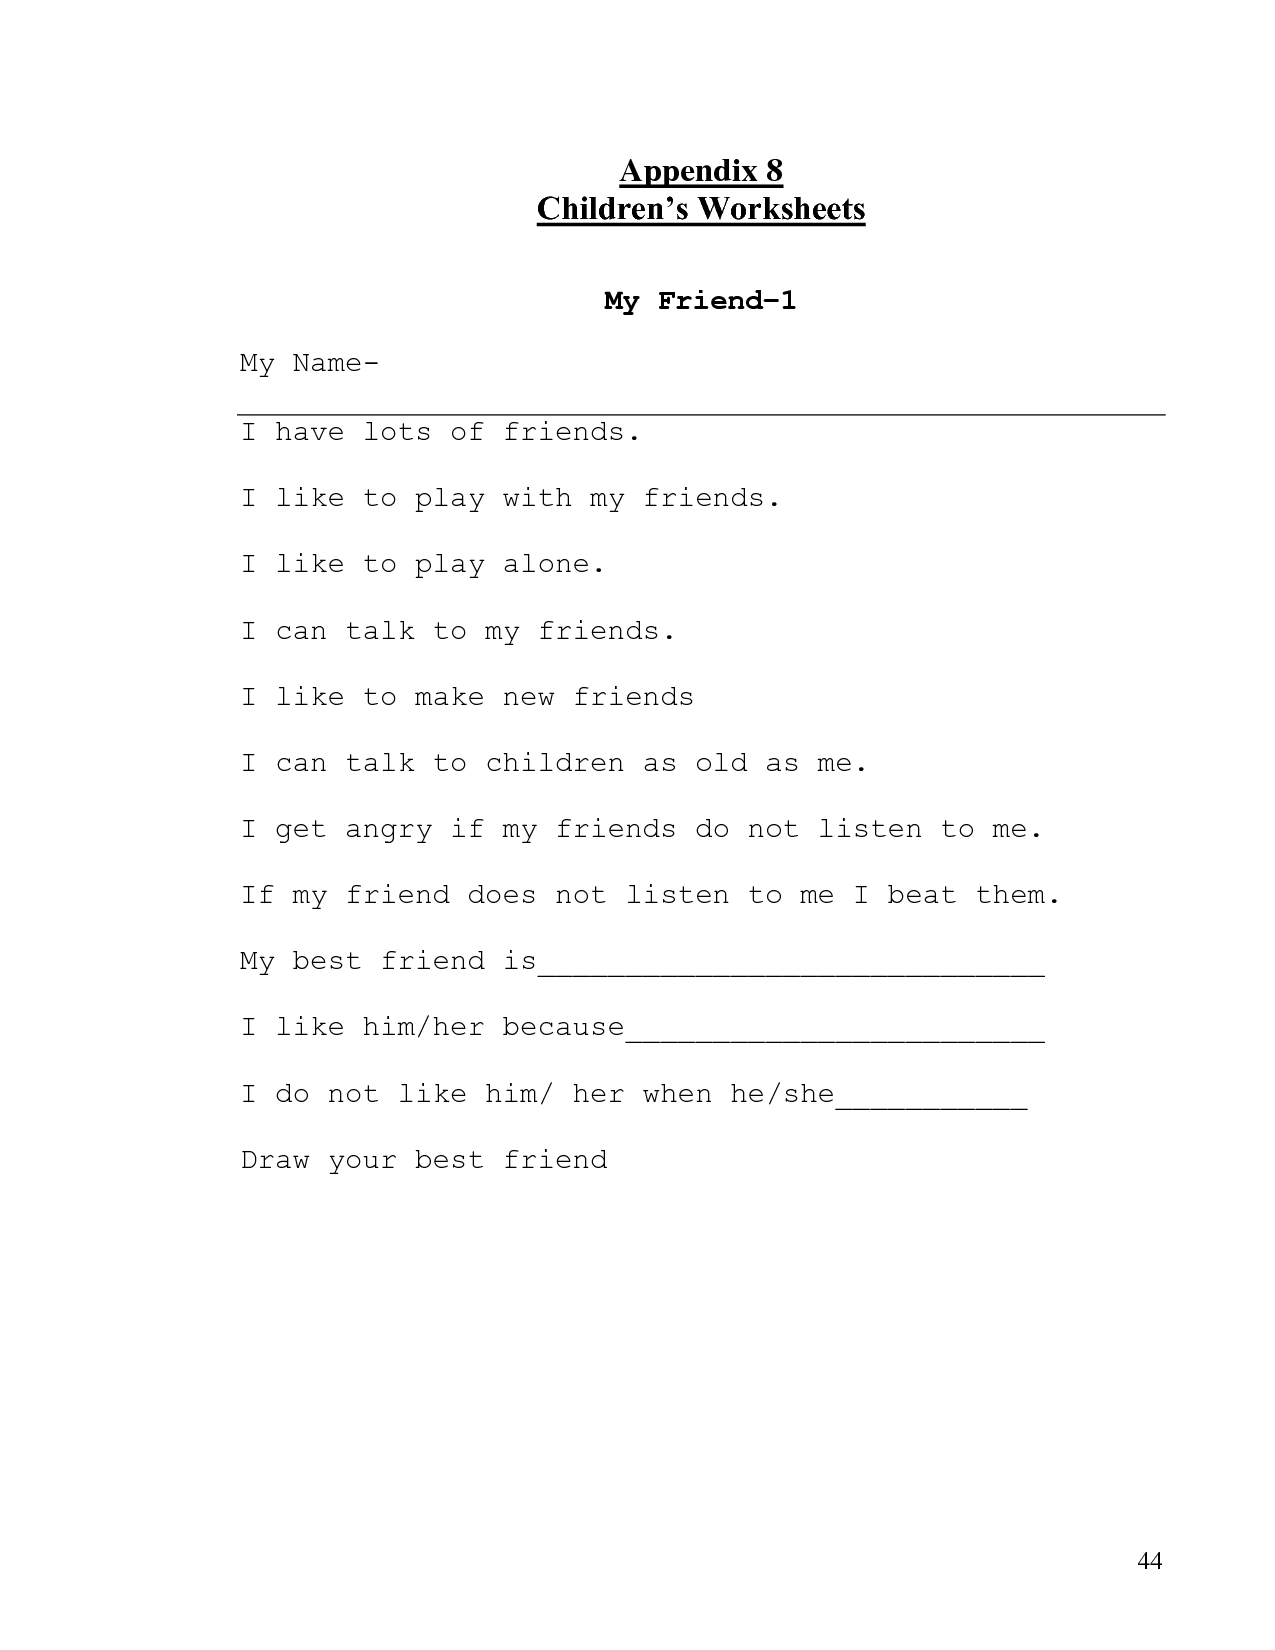 Worksheet for Kids About My Friend Image